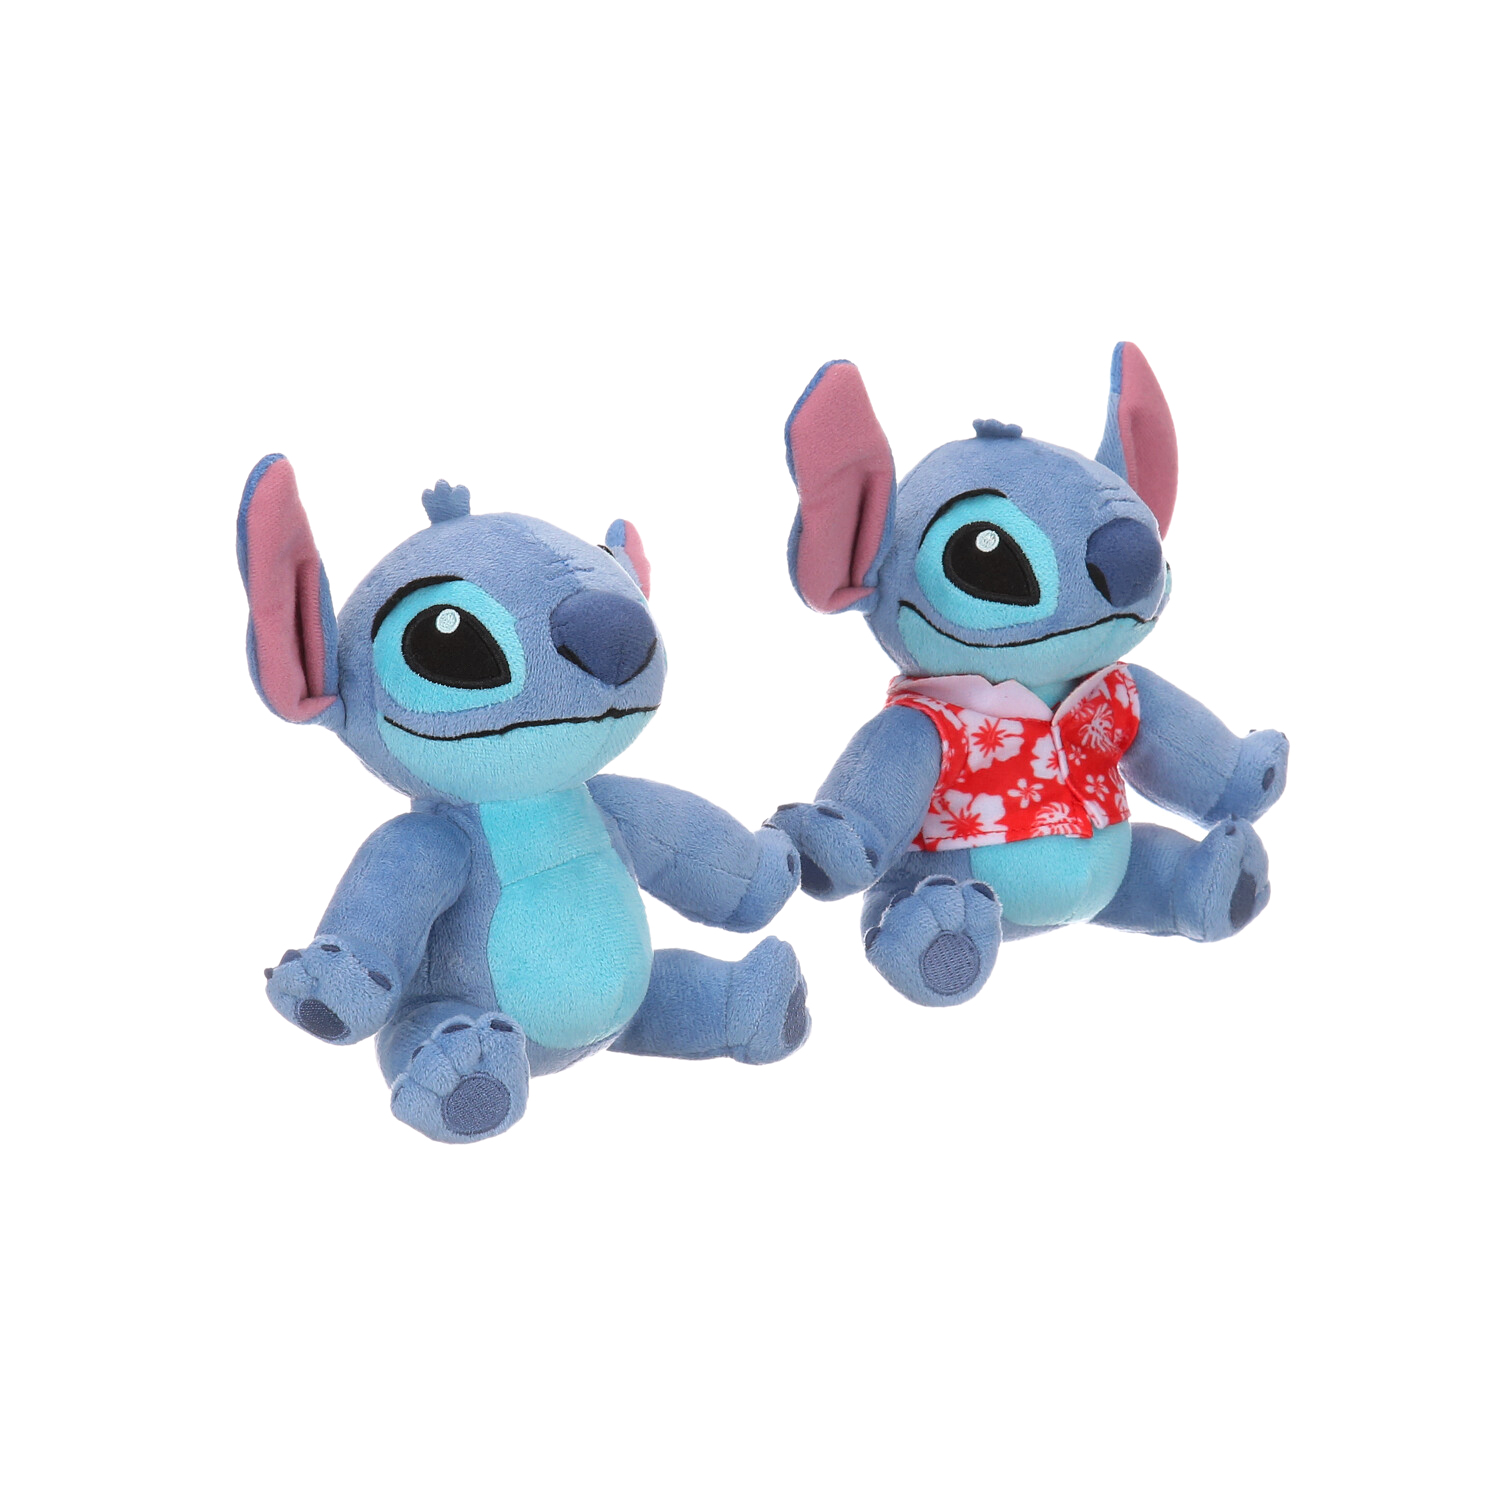 Disney Sitch Bean Plush 2-Pack, Officially Licensed Kids Toys for Ages 2 Up, Gifts and Presents, Size: 5.5 inches; 3.0 inches; 6.0 Inches, Blue